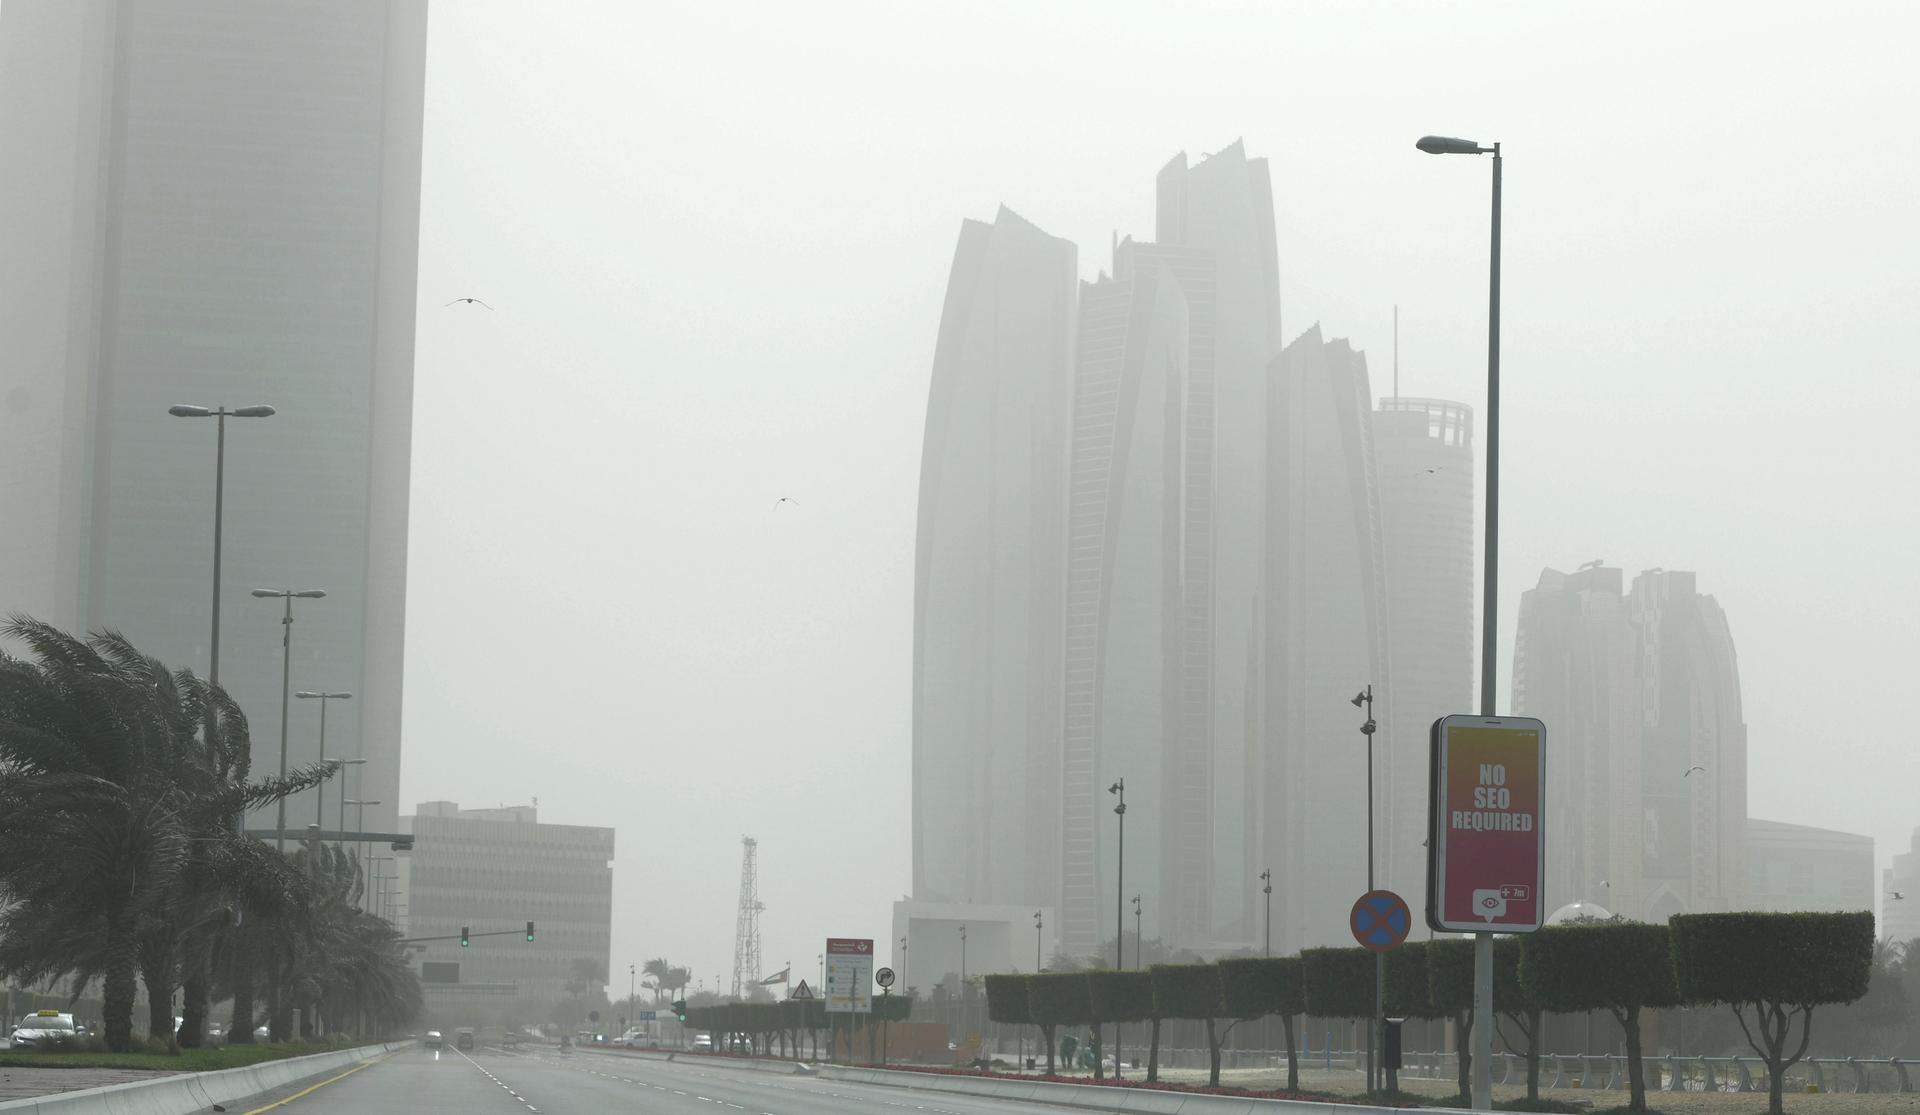 Environment Agency Abu Dhabi reveals a monitoring plan to determine highly polluted places and assess the effect of urban development projects.